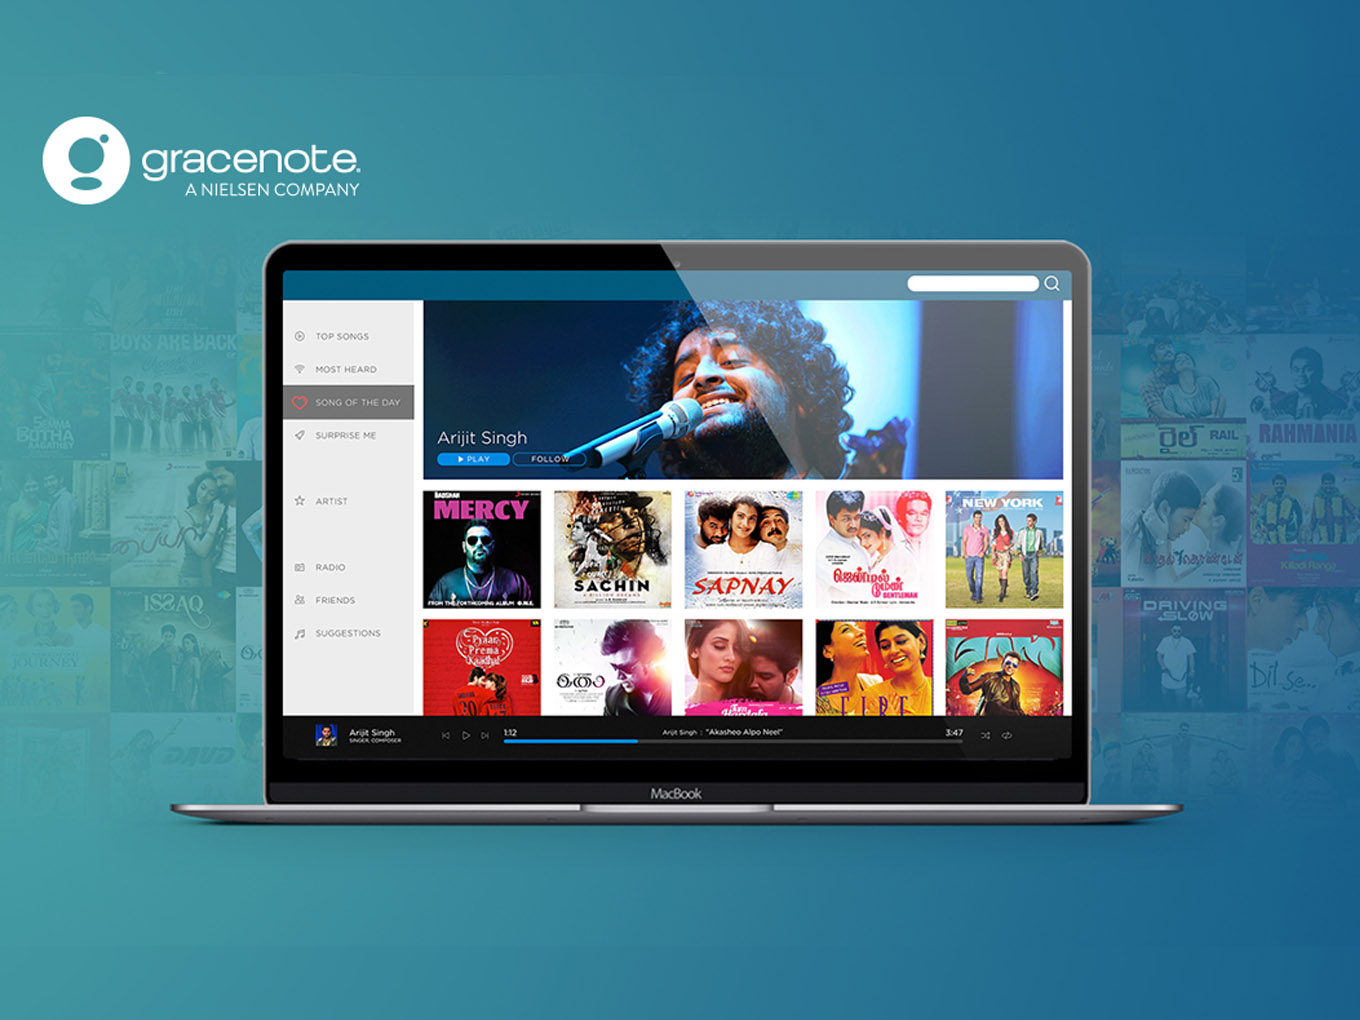 Gracenote wants music streaming services in India